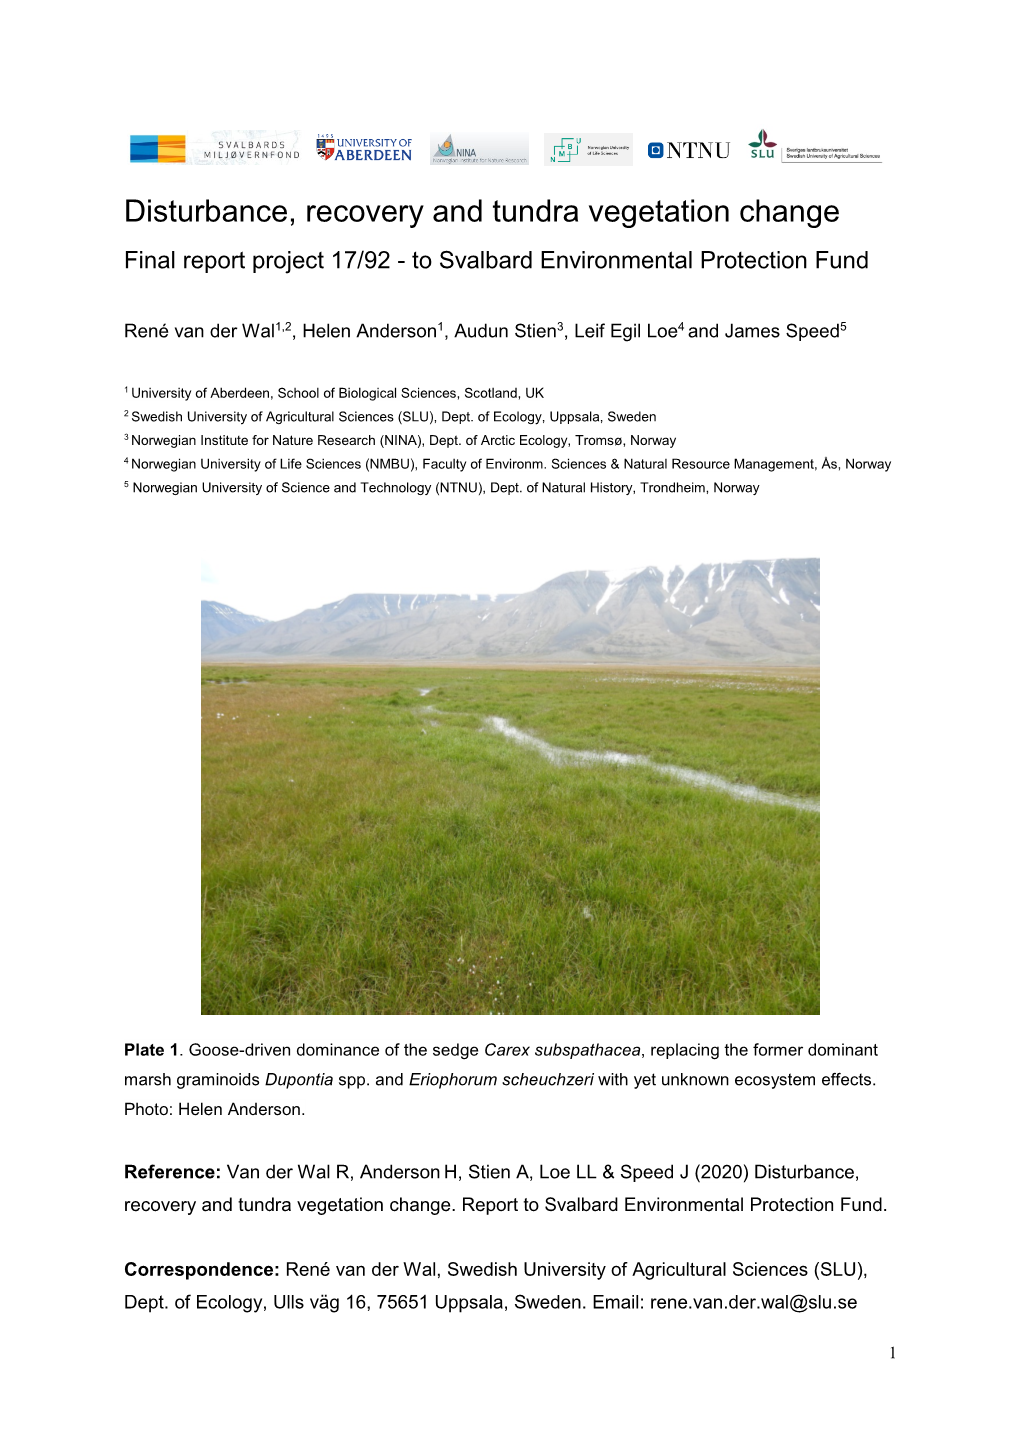 Disturbance, Recovery and Tundra Vegetation Change Final Report Project 17/92 - to Svalbard Environmental Protection Fund